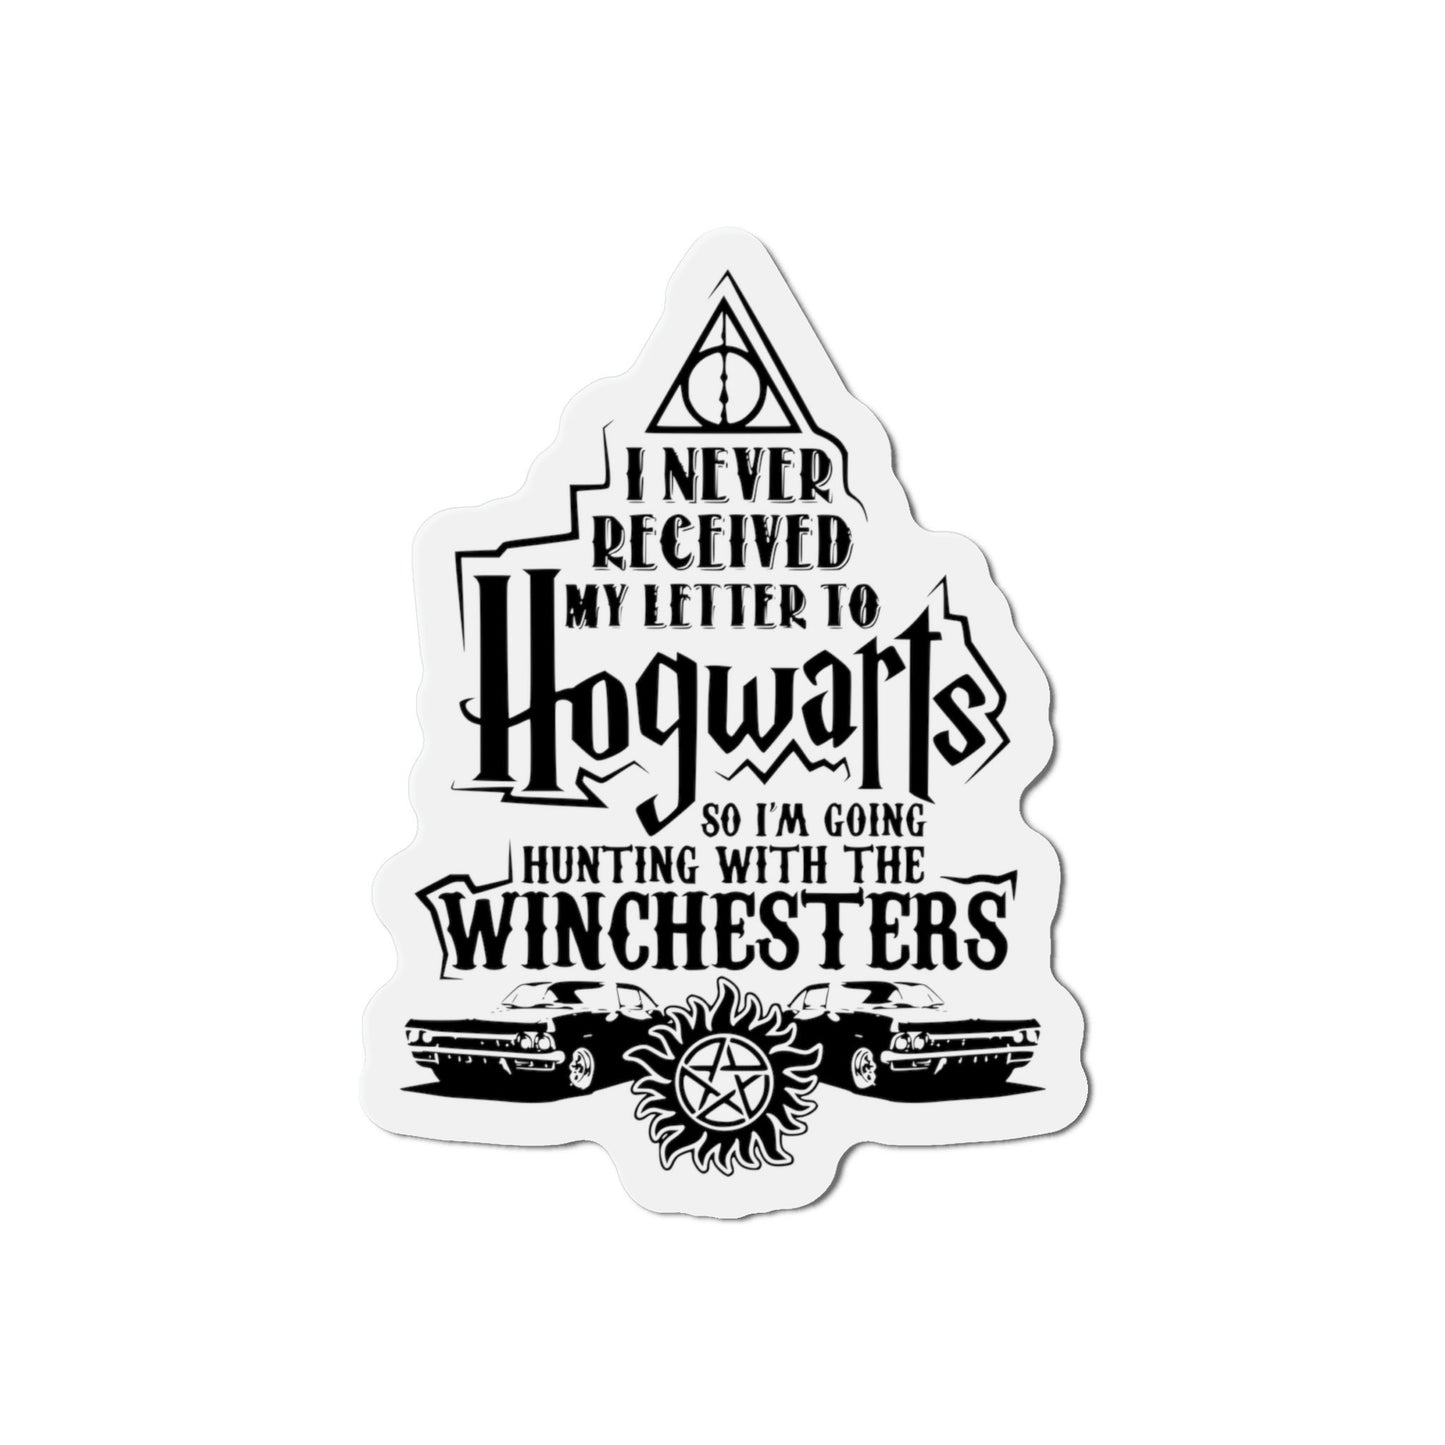 Supernatural inspired - Letter from Hogwarts...Going hunting magnet - Choice of 3 sizes